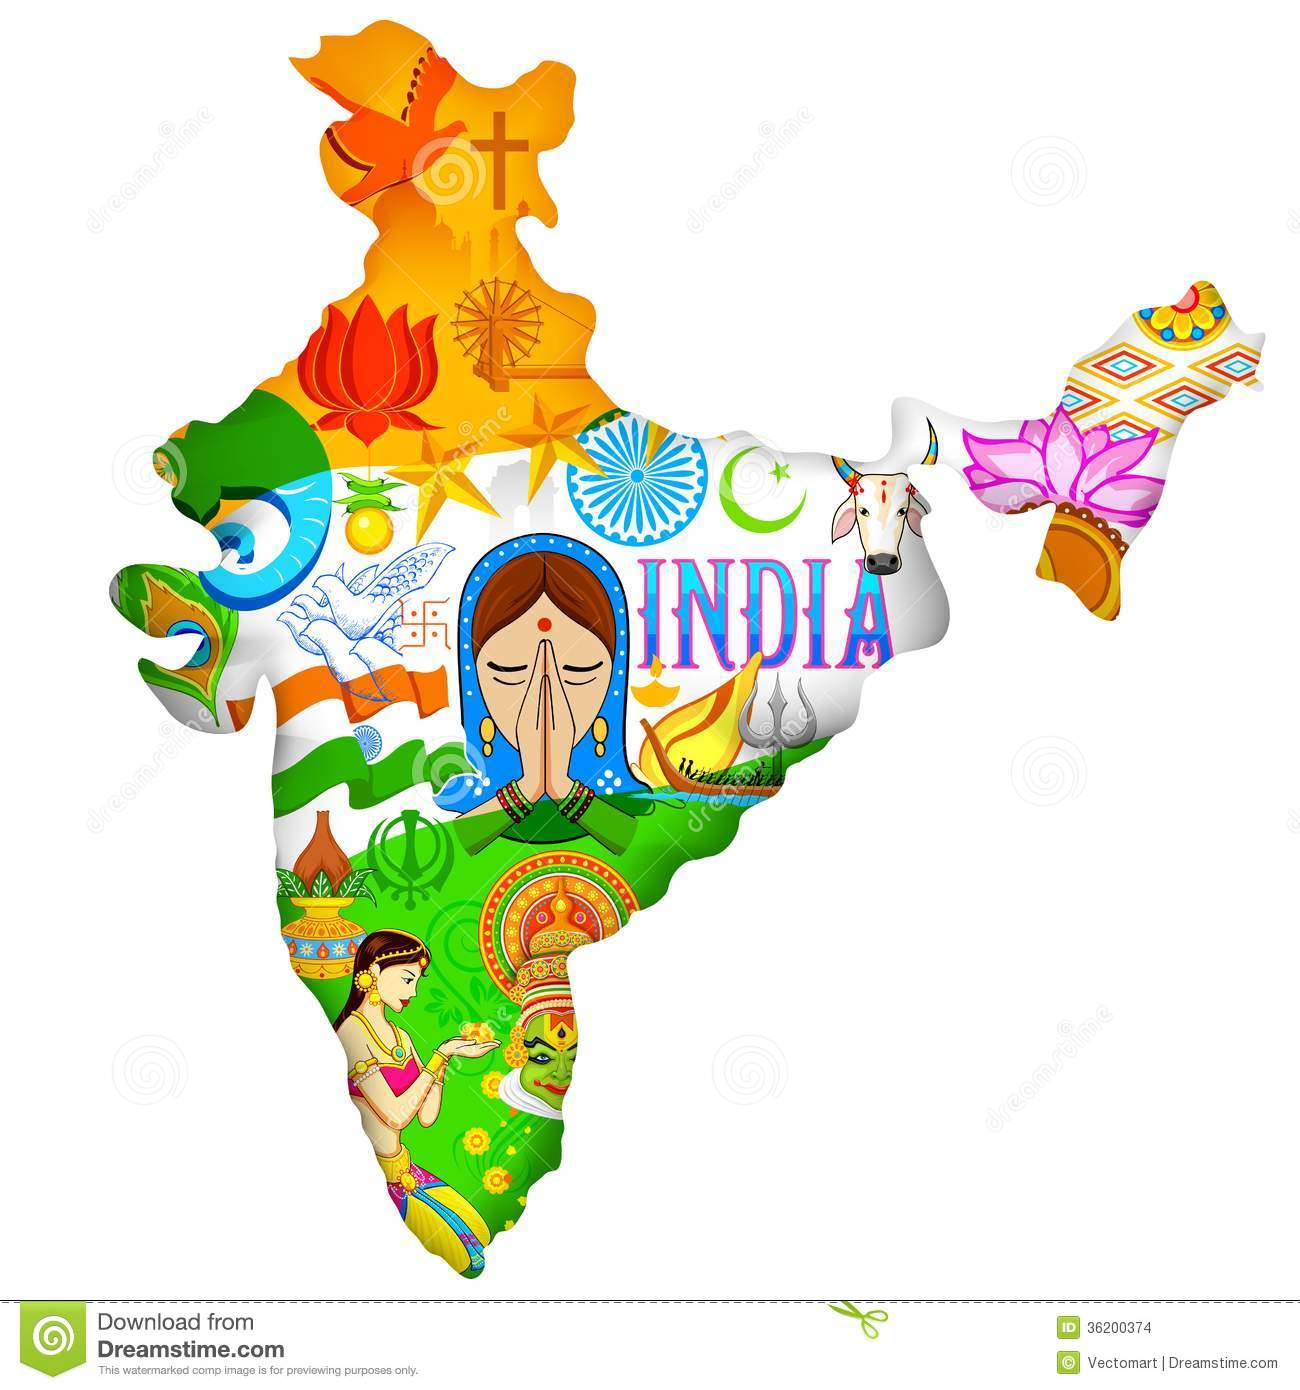 culture-india-illustration-indian-map-showing-36200374